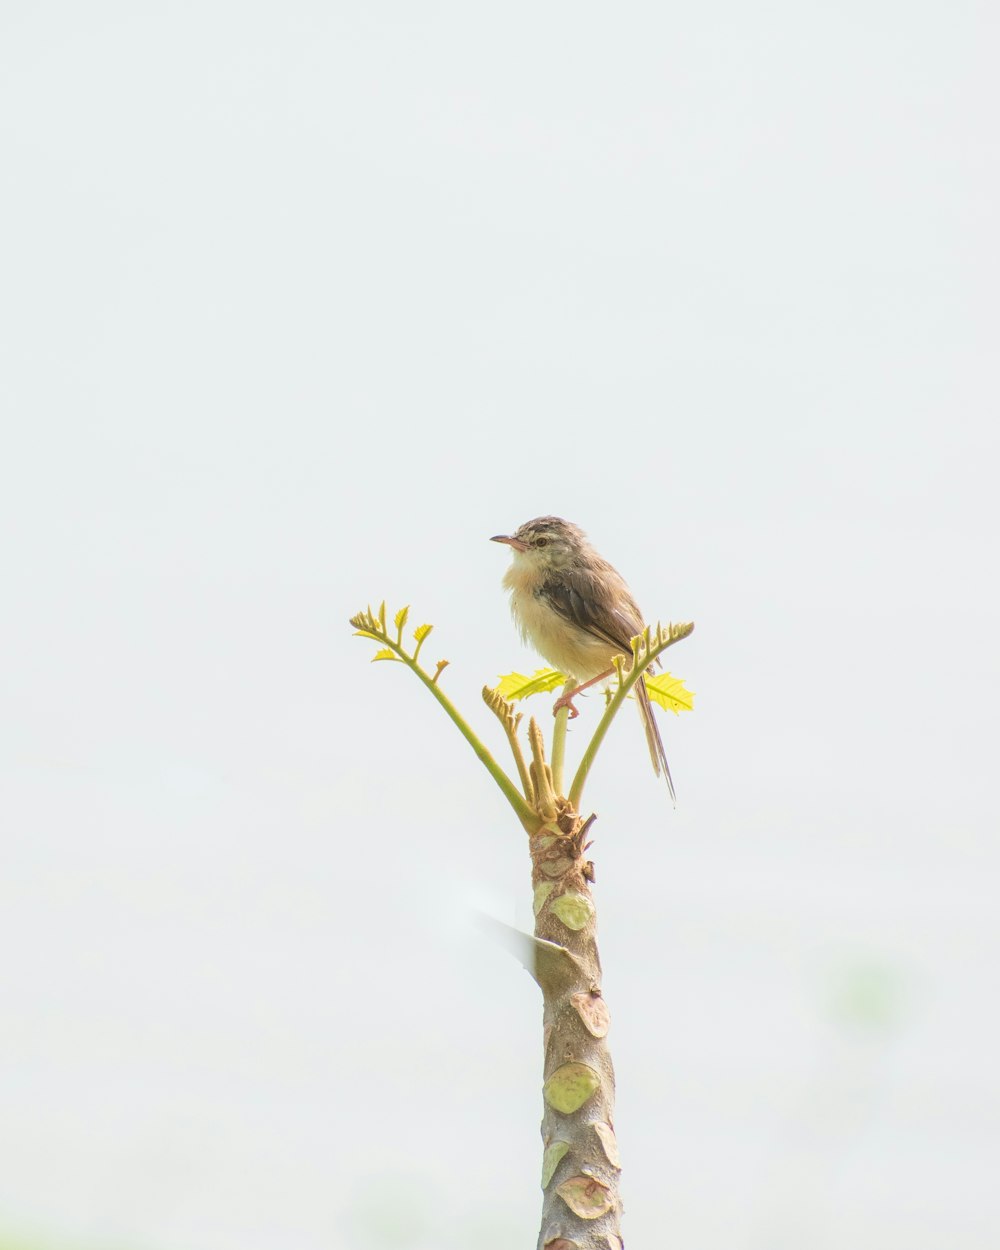 a small bird sitting on top of a yellow flower